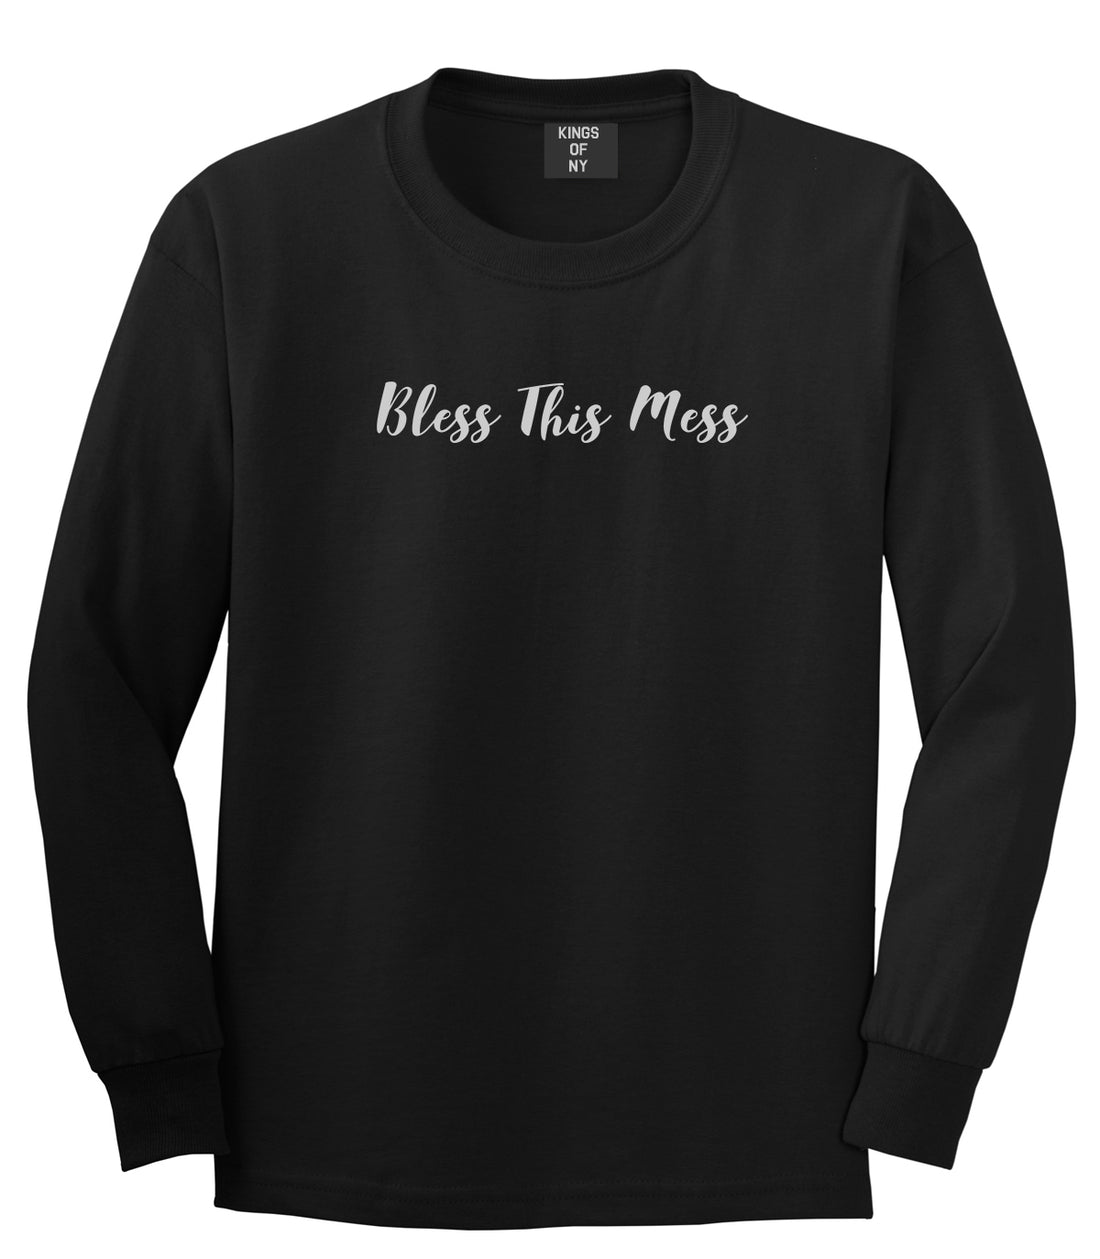 Bless This Mess Black Long Sleeve T-Shirt by Kings Of NY